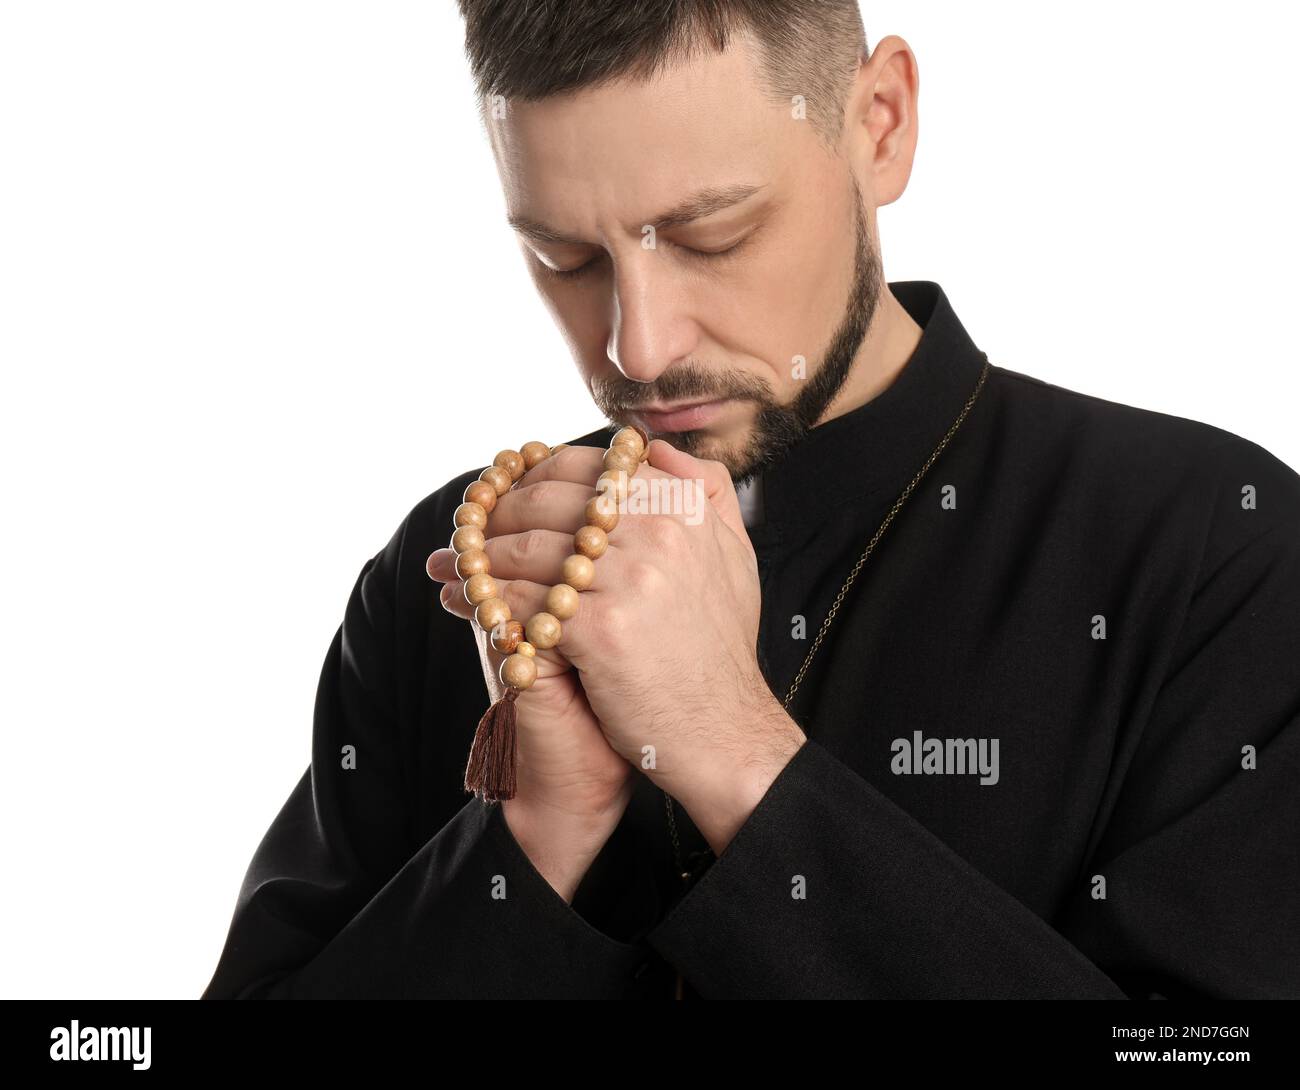 Priest with beads praying on white background Stock Photo